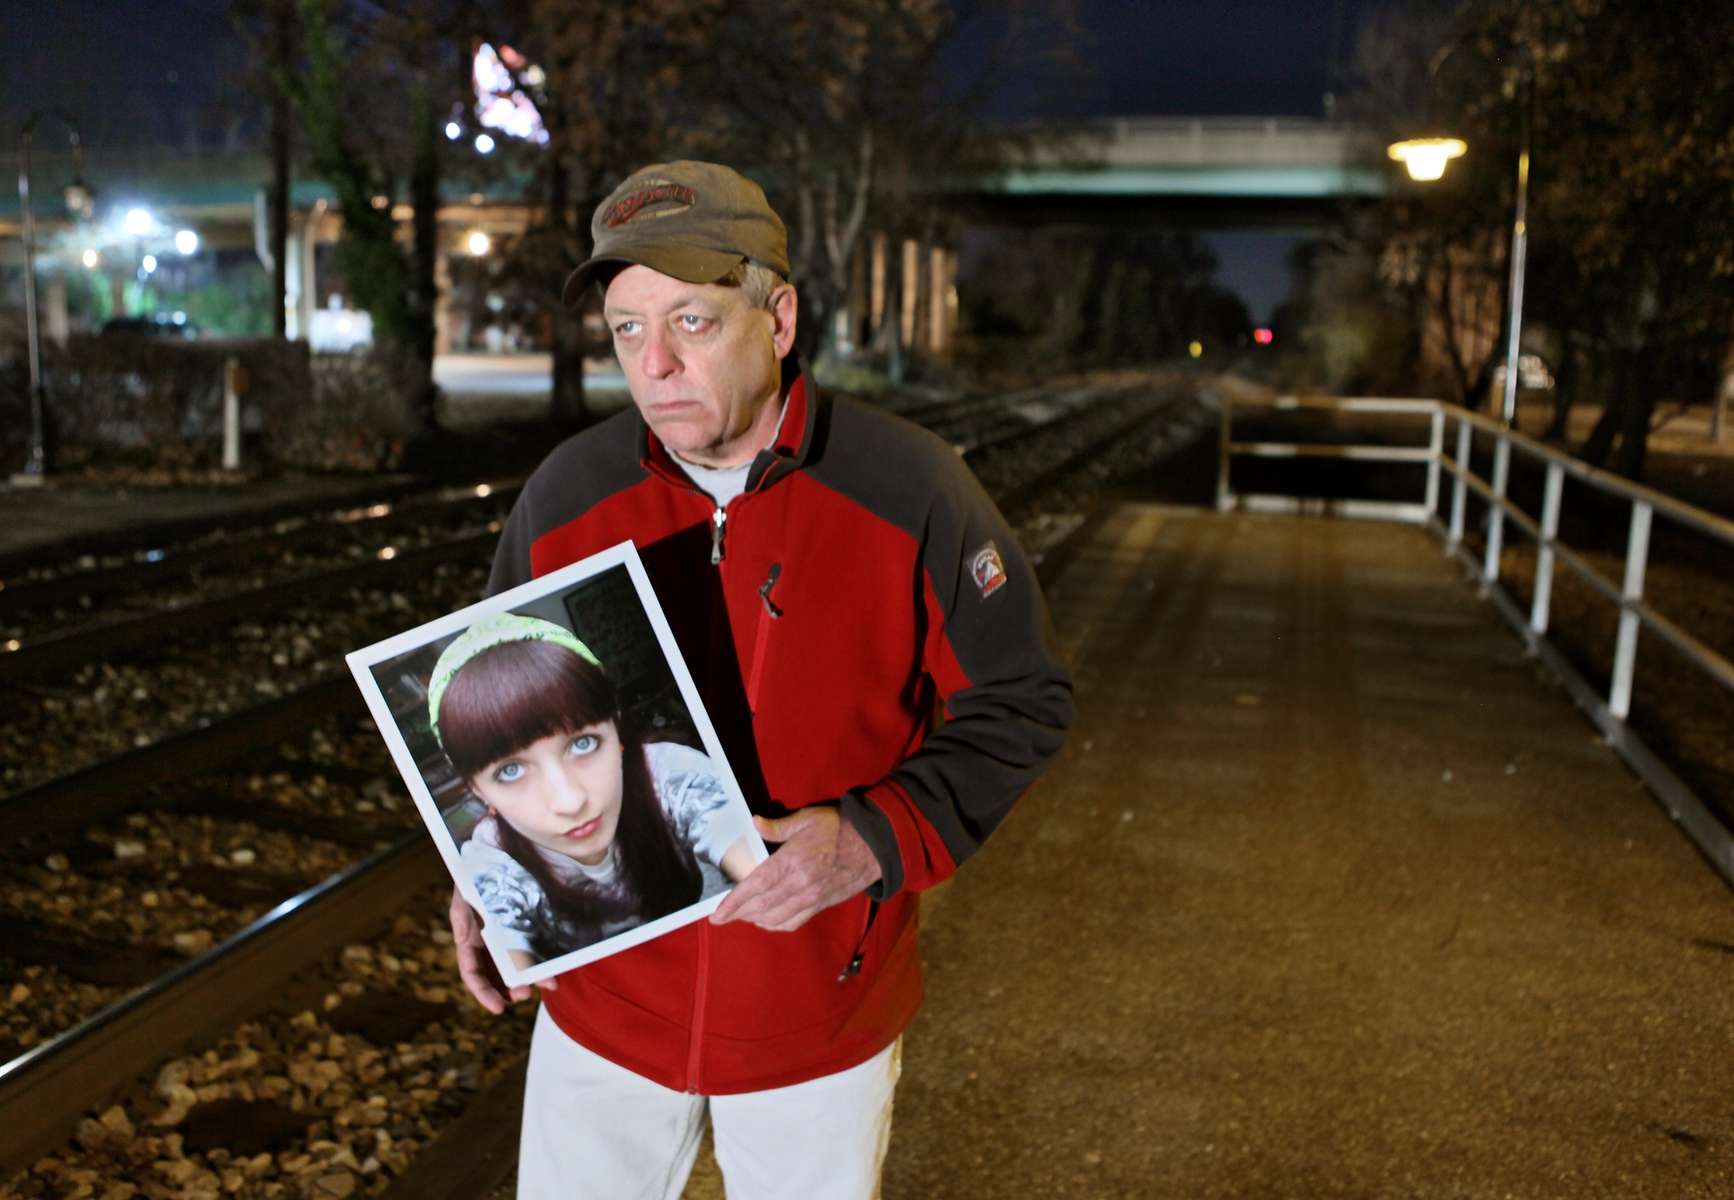 Walter Gaffney holds a picture of his 17-year-old daughter Mary Gaffney on Wednesday, Nov. 28, 2012, along the set of tracks where she was hit and killed by a train in Riverdale Park, Md..  Mary Gaffney and two other people were killed by trains the same day as 14-year-old Cam Vennard, from Kirkwood, was stuck and killed by a train.  Photo By David Carson, dcarson@post-dispatch.com